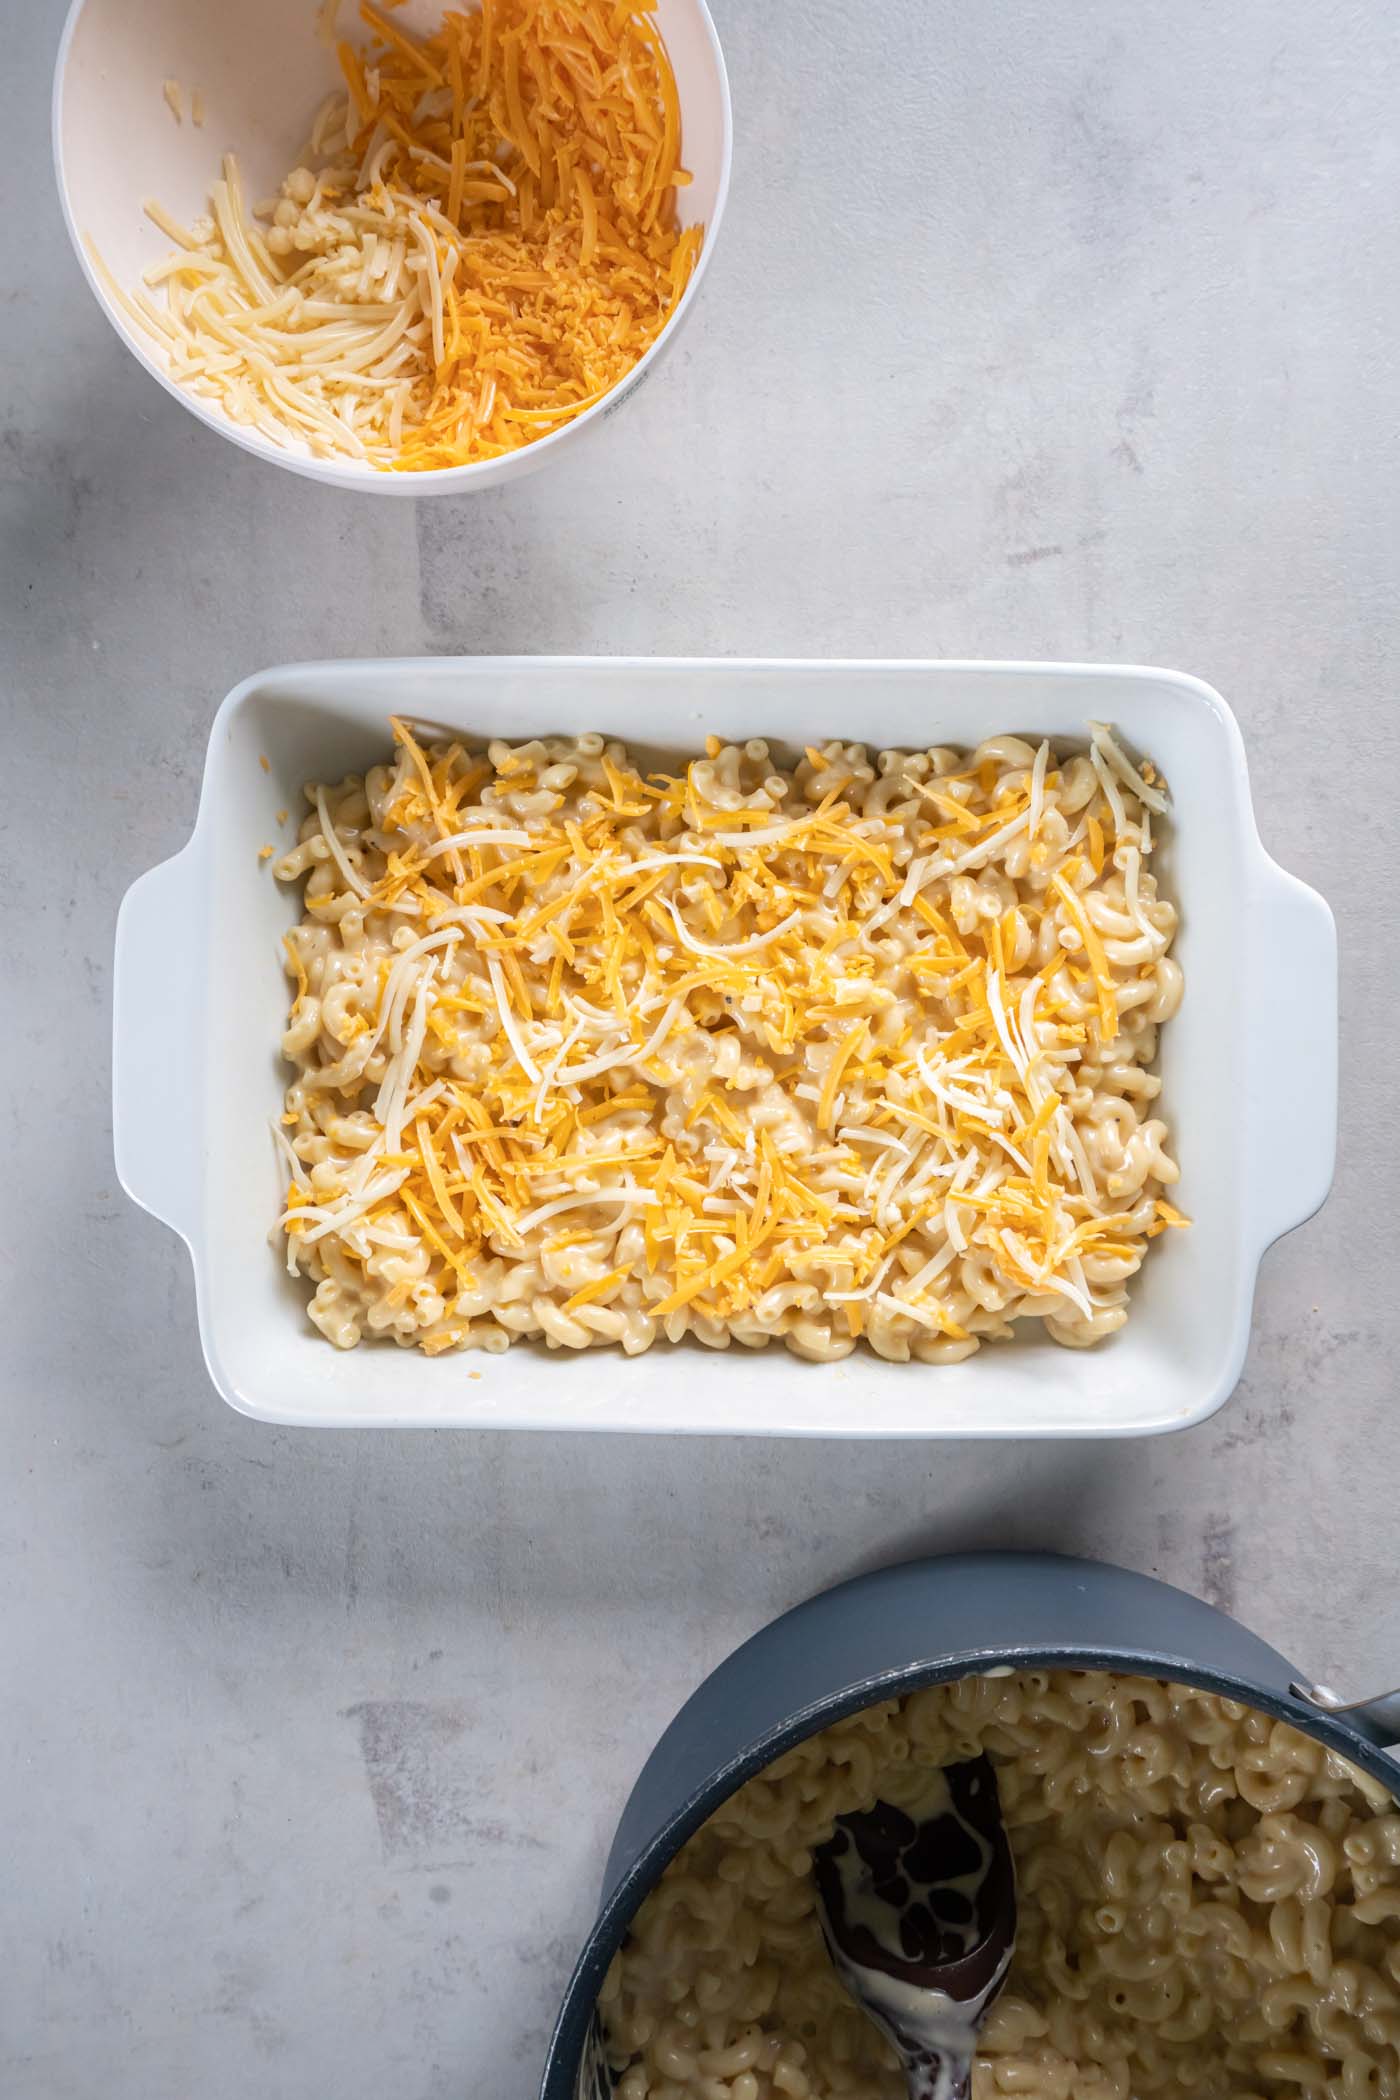 Cheesy pasta layer in baking dish with shredded cheese on top.